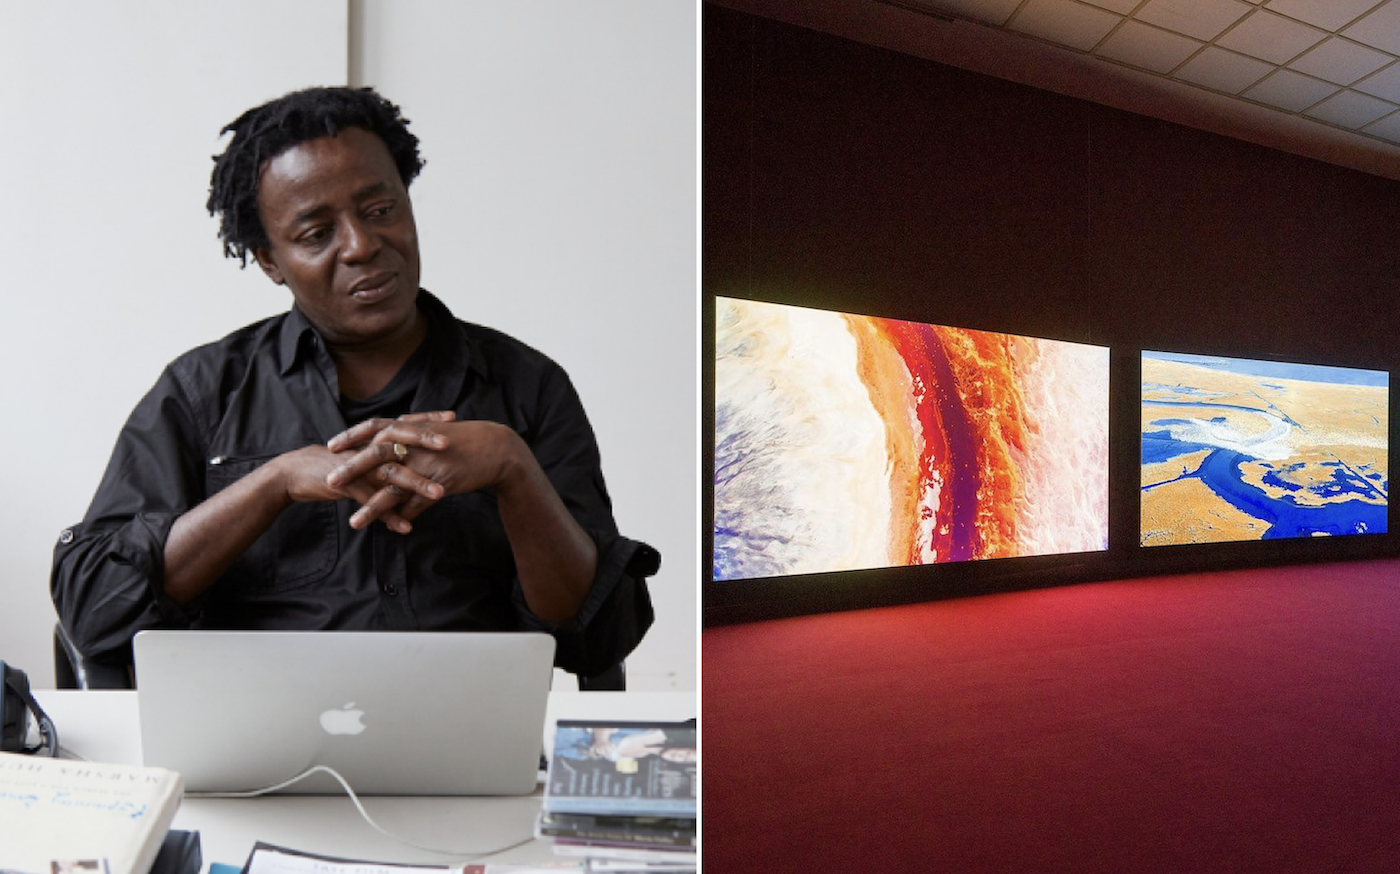 (left) John Akomfrah at his London studio, 2016. © Jack Hems; (right) John Akomfrah, exhibition view at Secession, Vienna, 2020. Courtesy of the artist and Secession Vienna